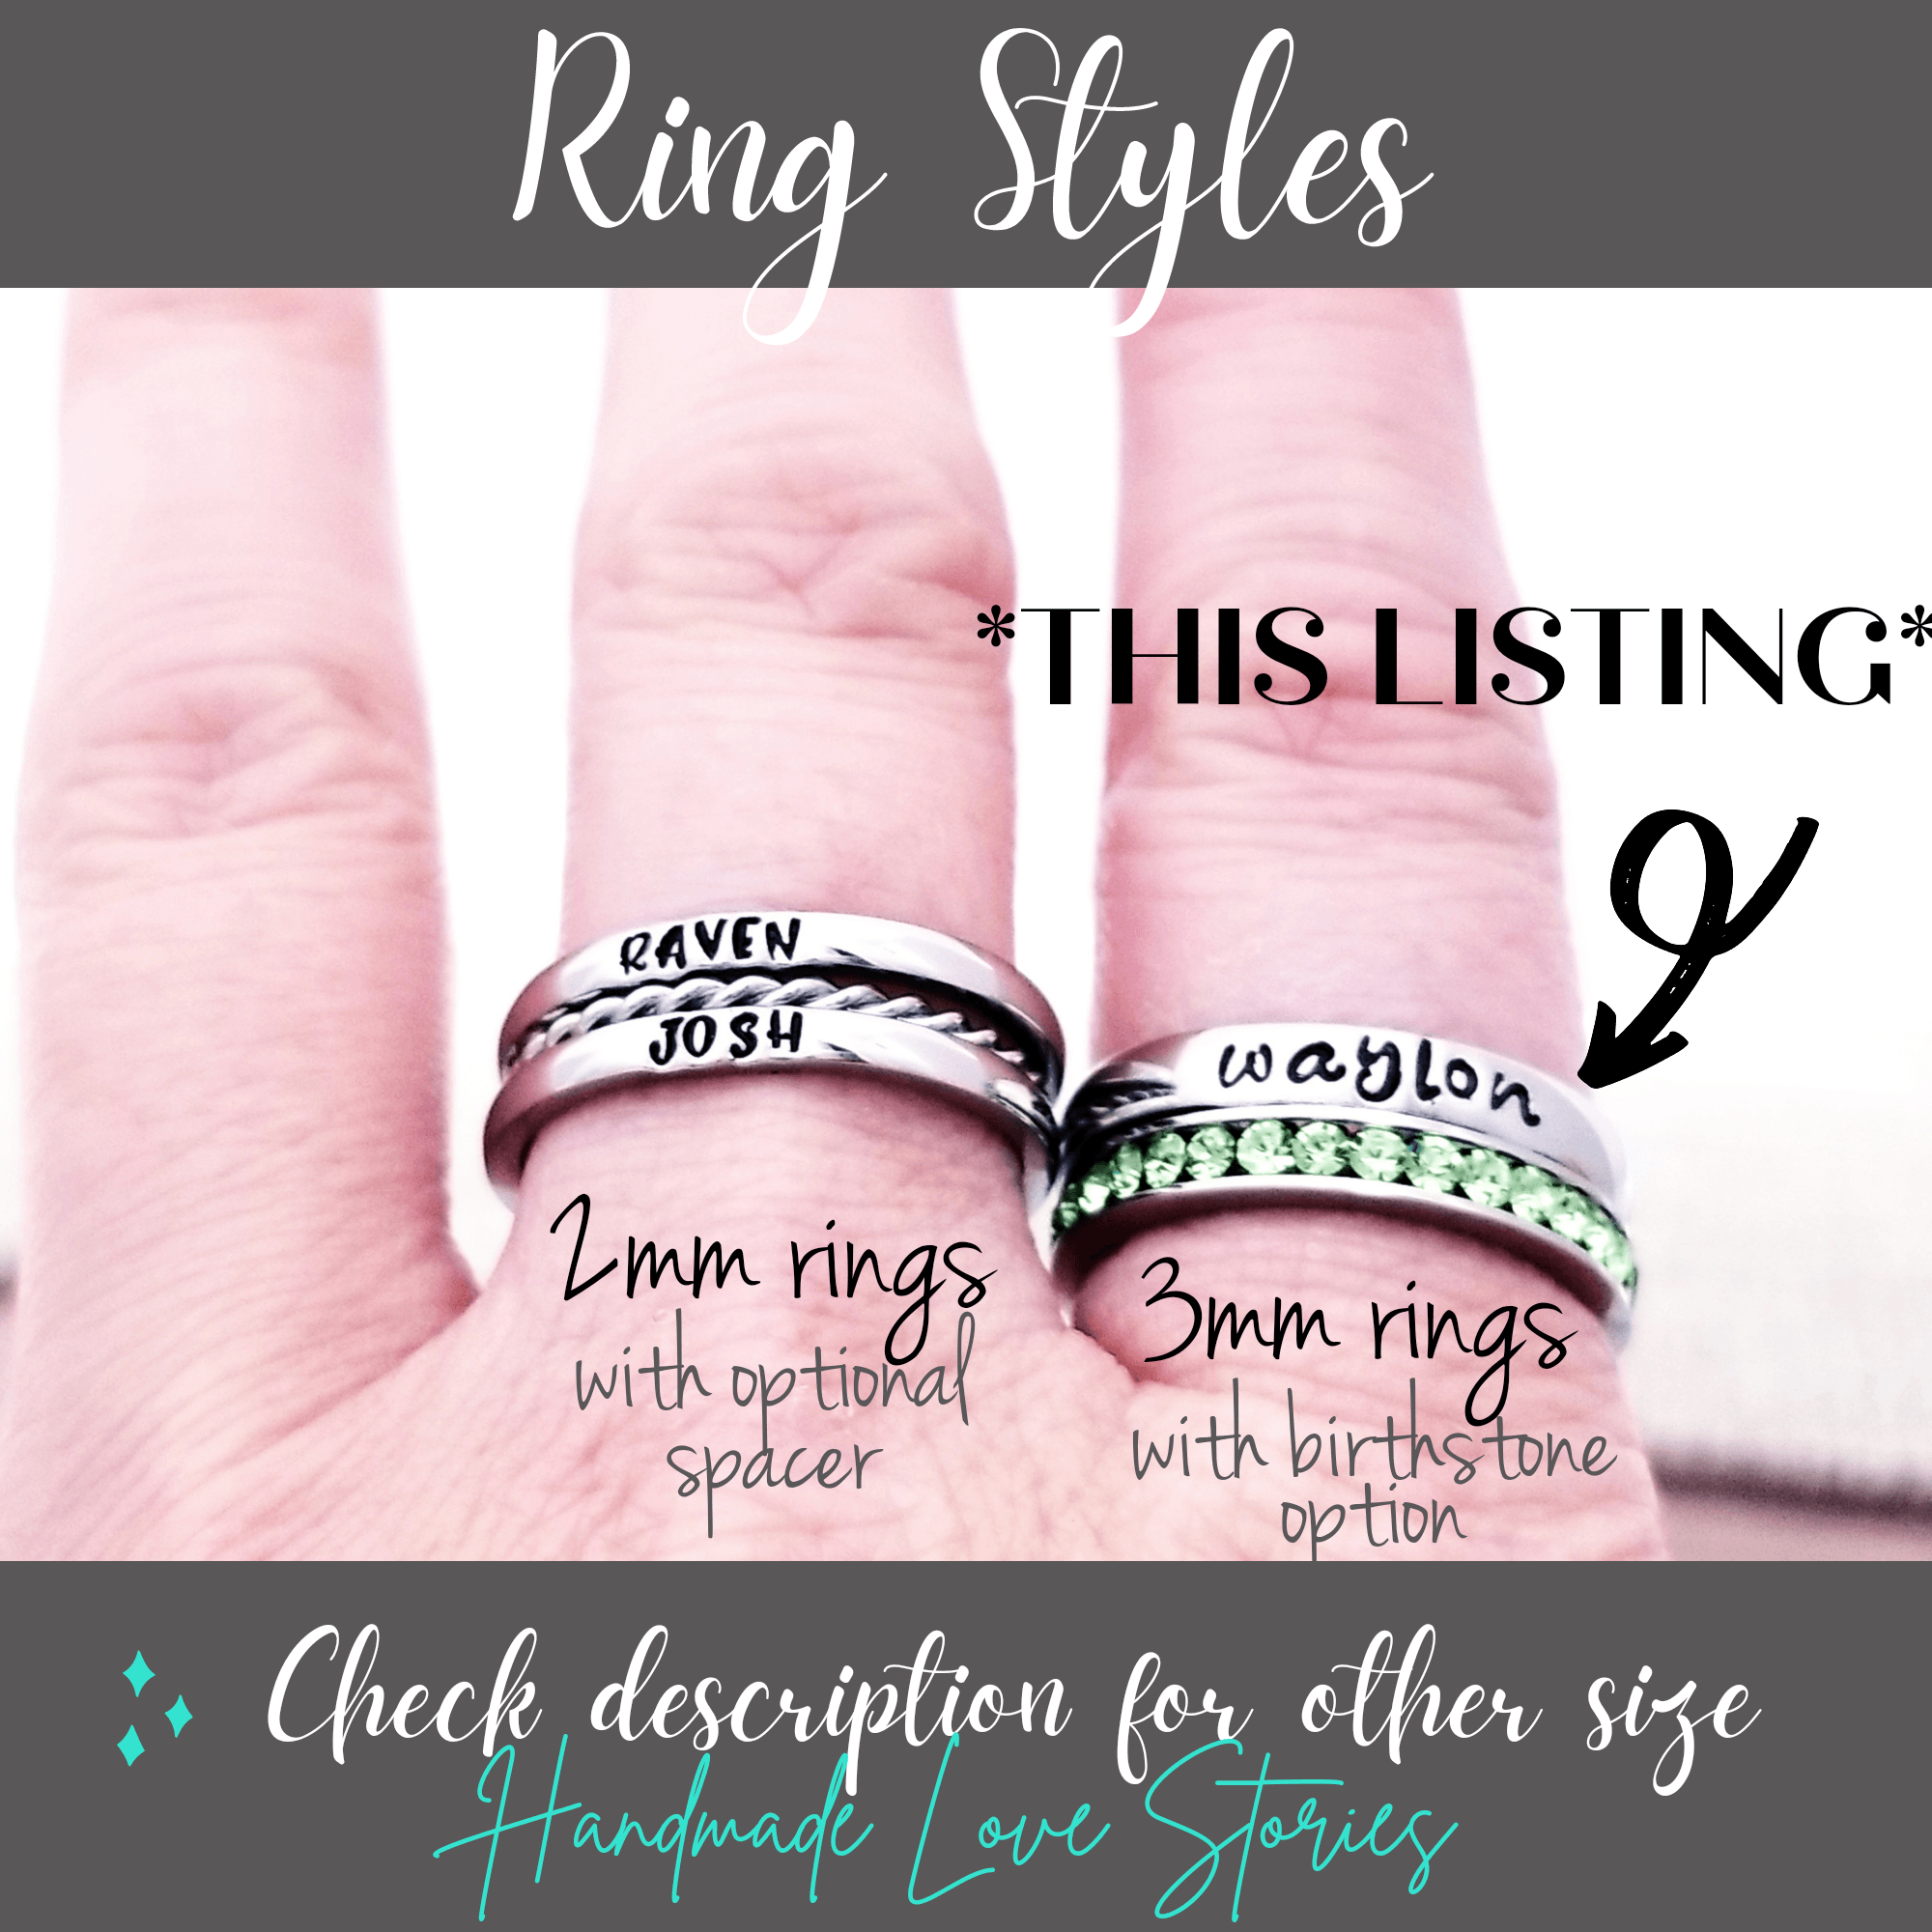 Mother Rings, Custom Hand Stamped Rings, Personalized Gift, Eternity rings, Stainless Steel